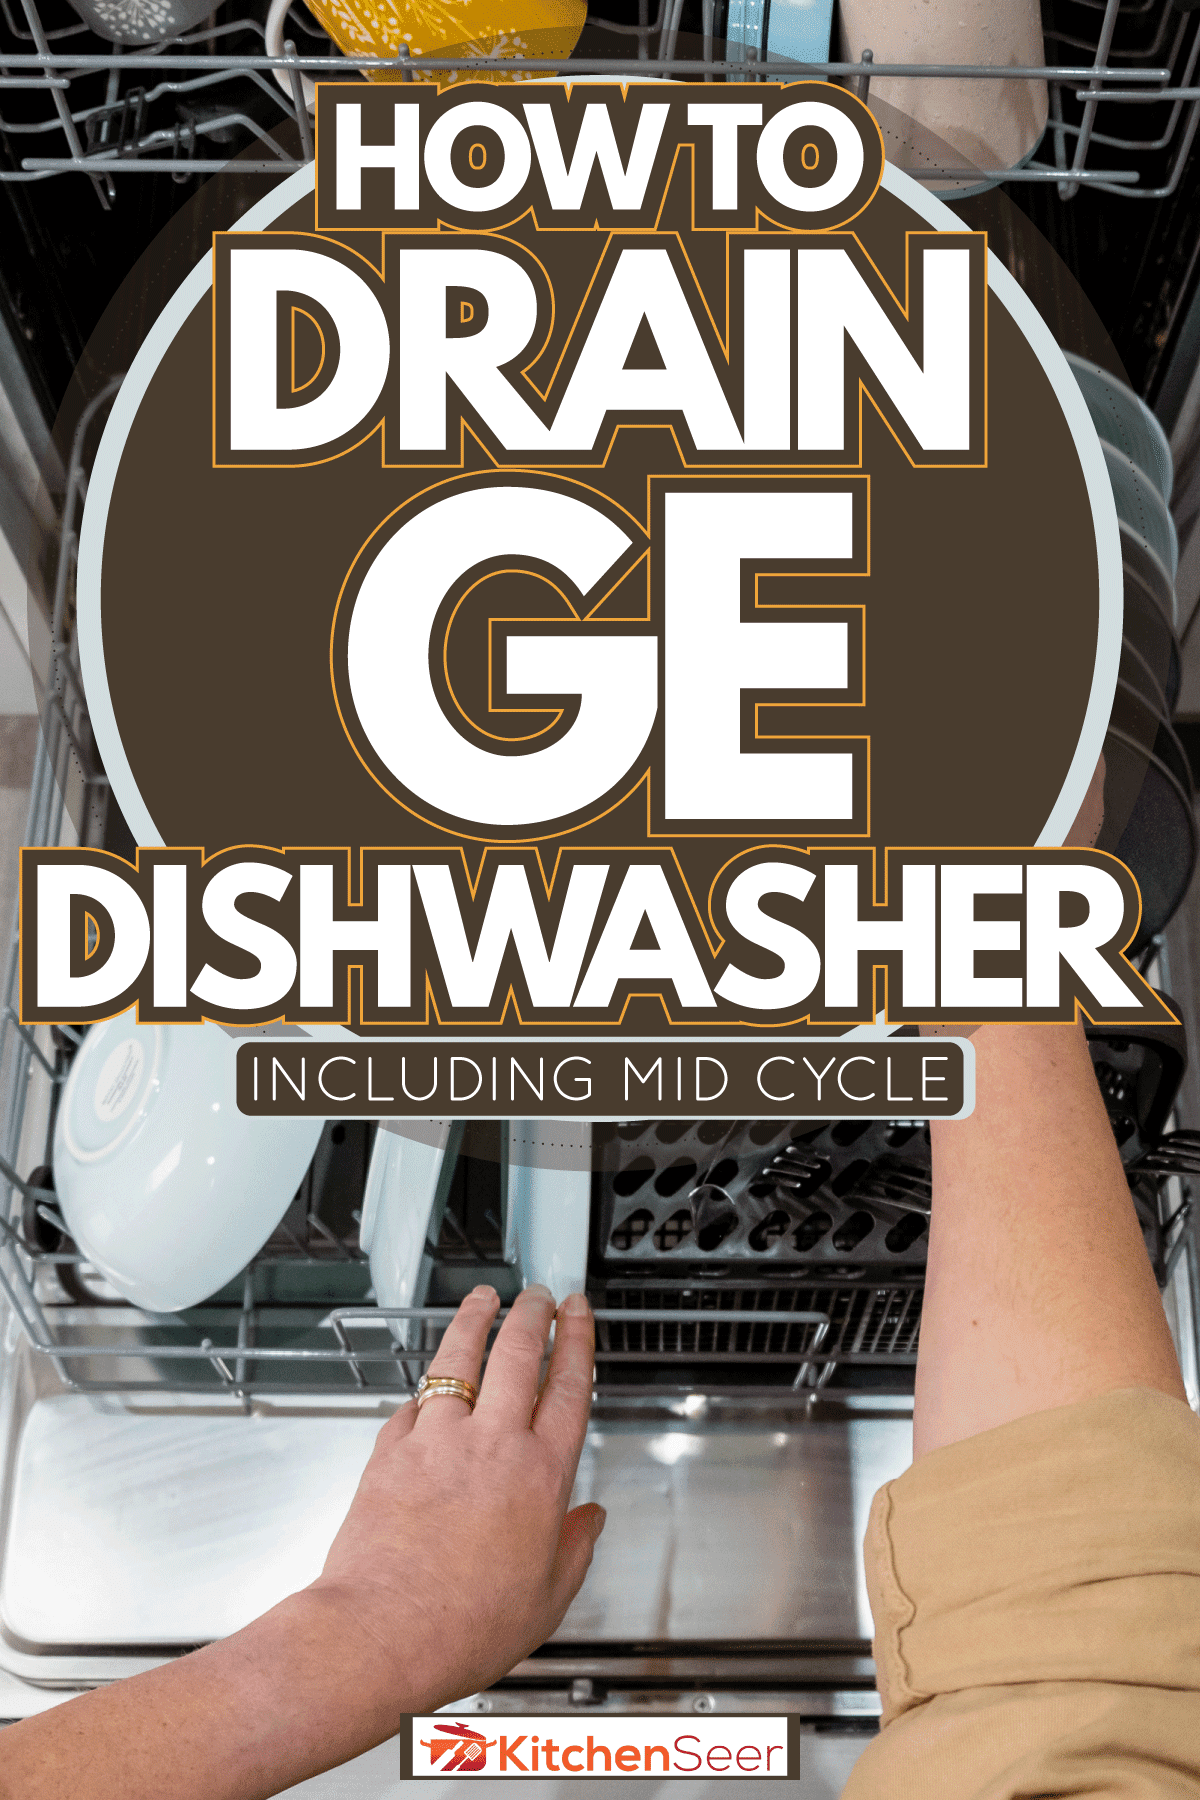 How To Drain Ge Dishwasher Mid Cycle How To Drain GE Dishwasher [Including Mid Cycle] - Kitchen Seer